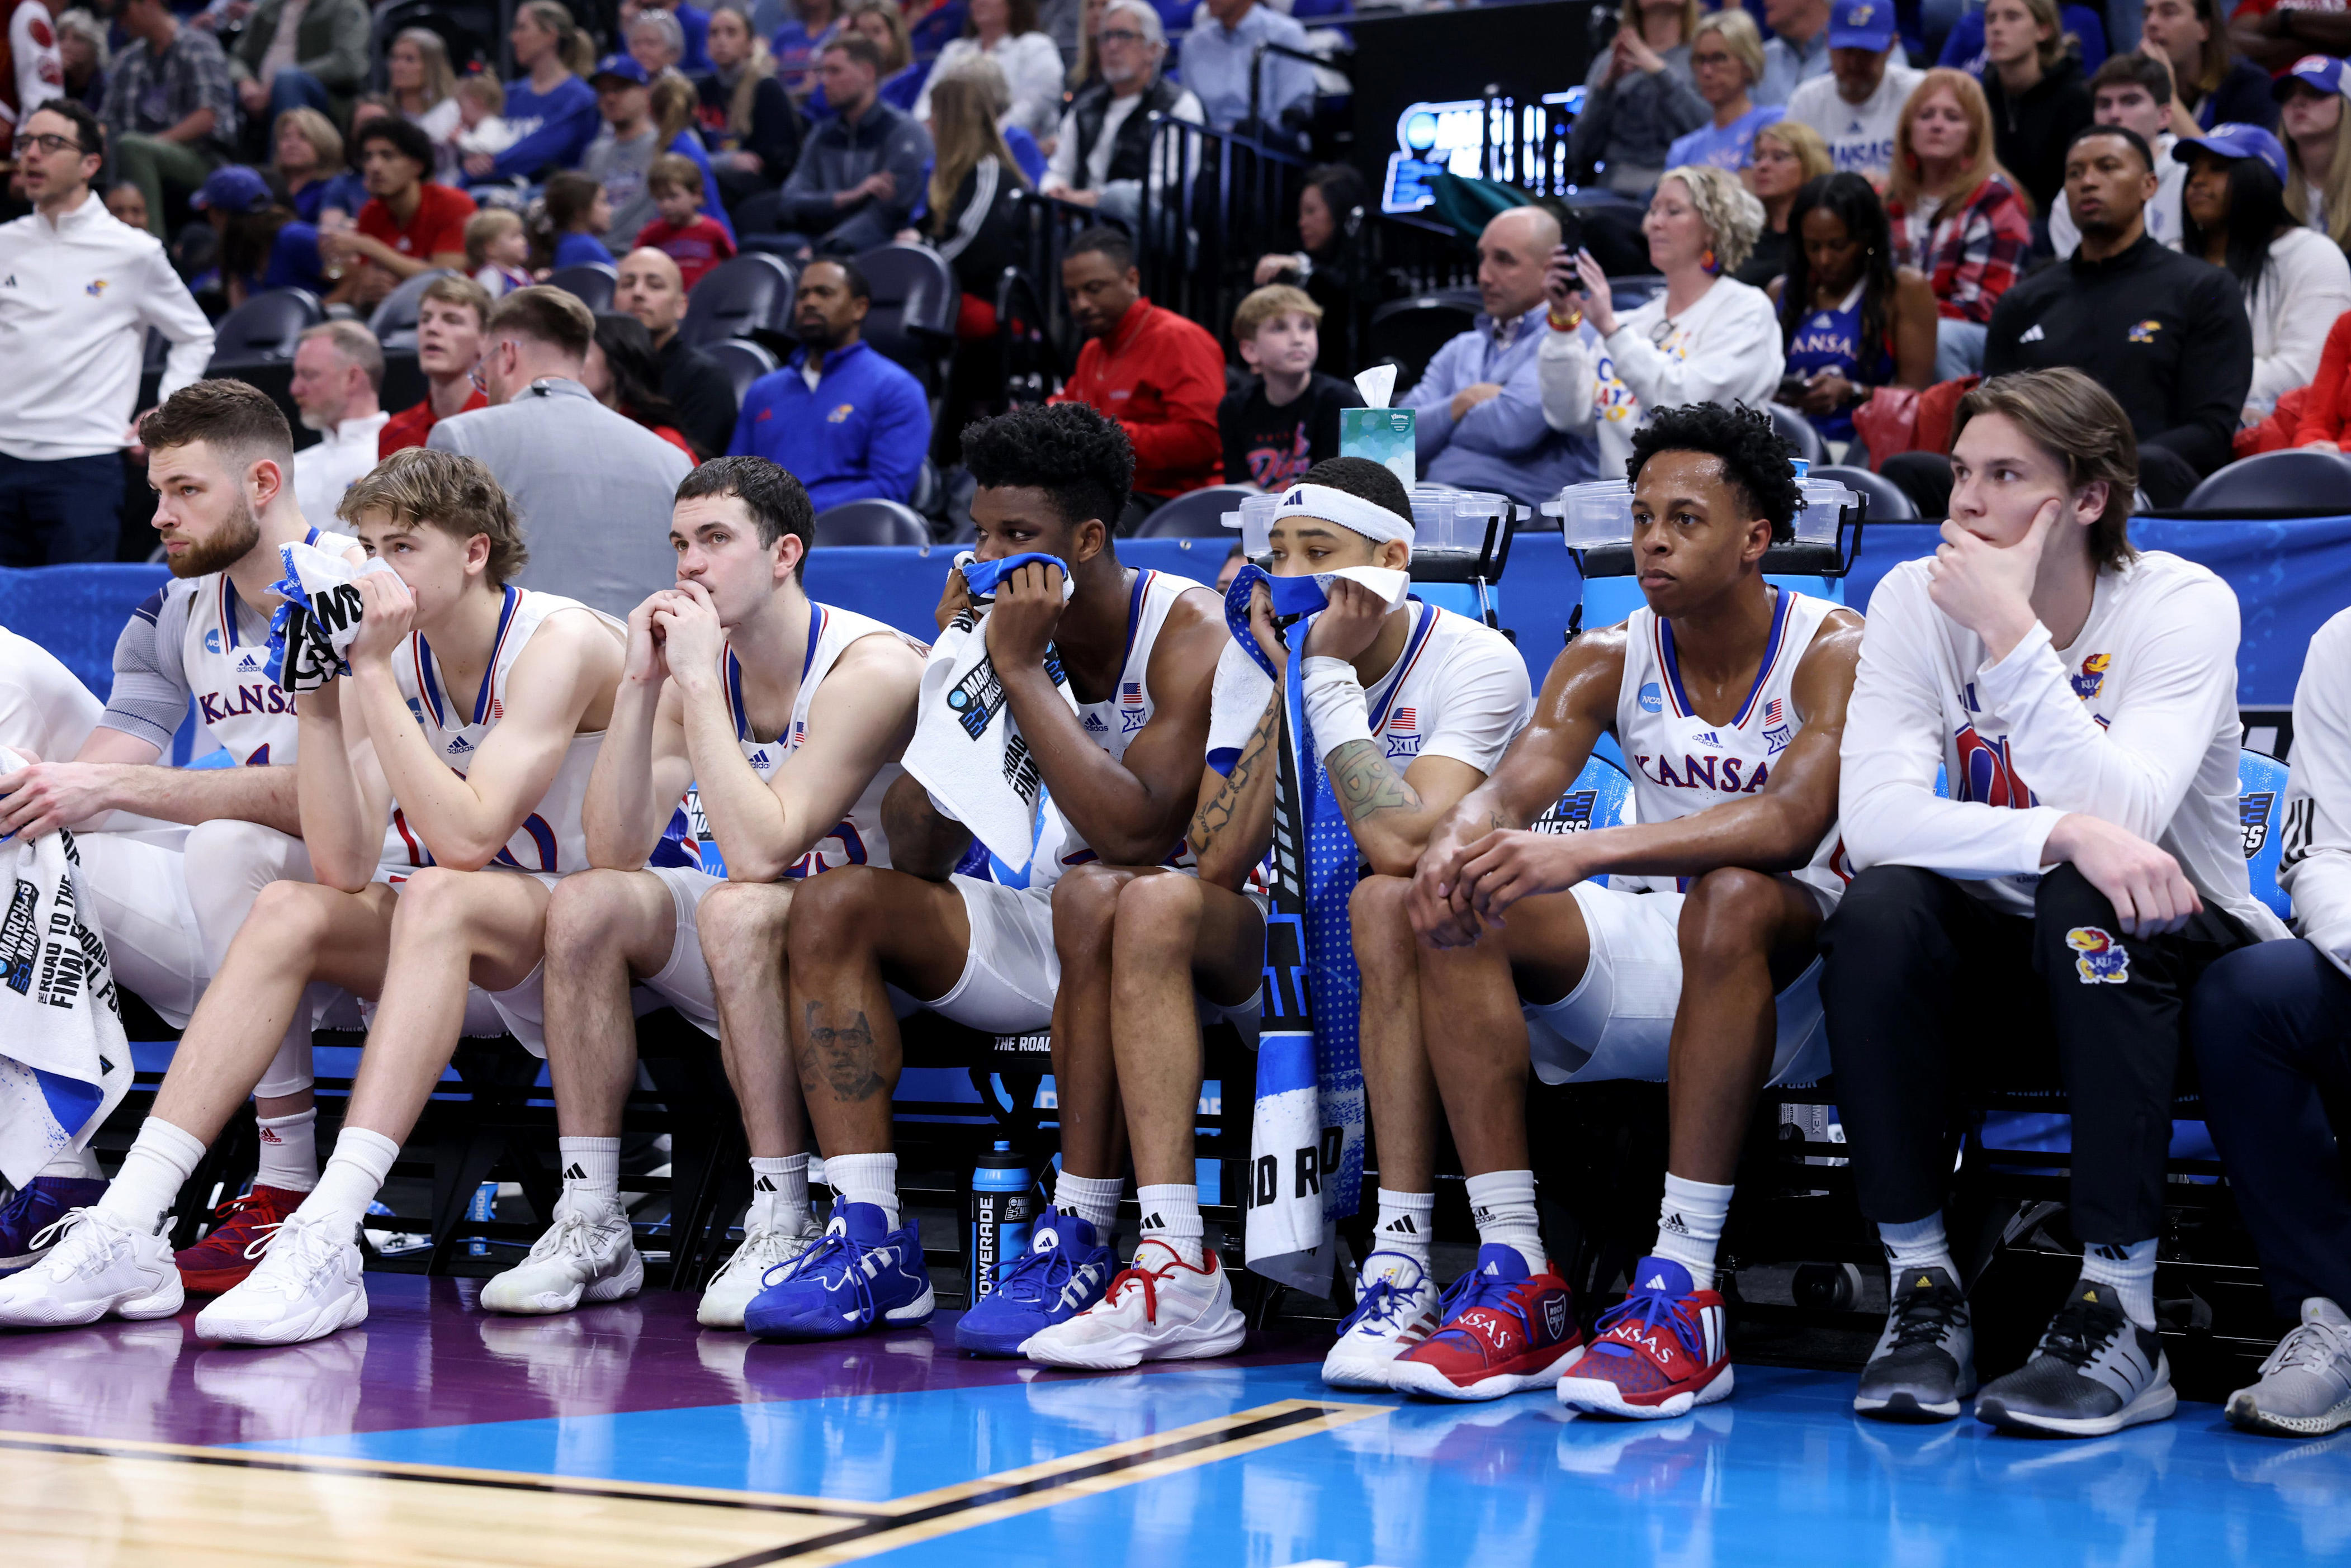 kansas started at no. 1 and finished march madness with a second-round loss. what went wrong?